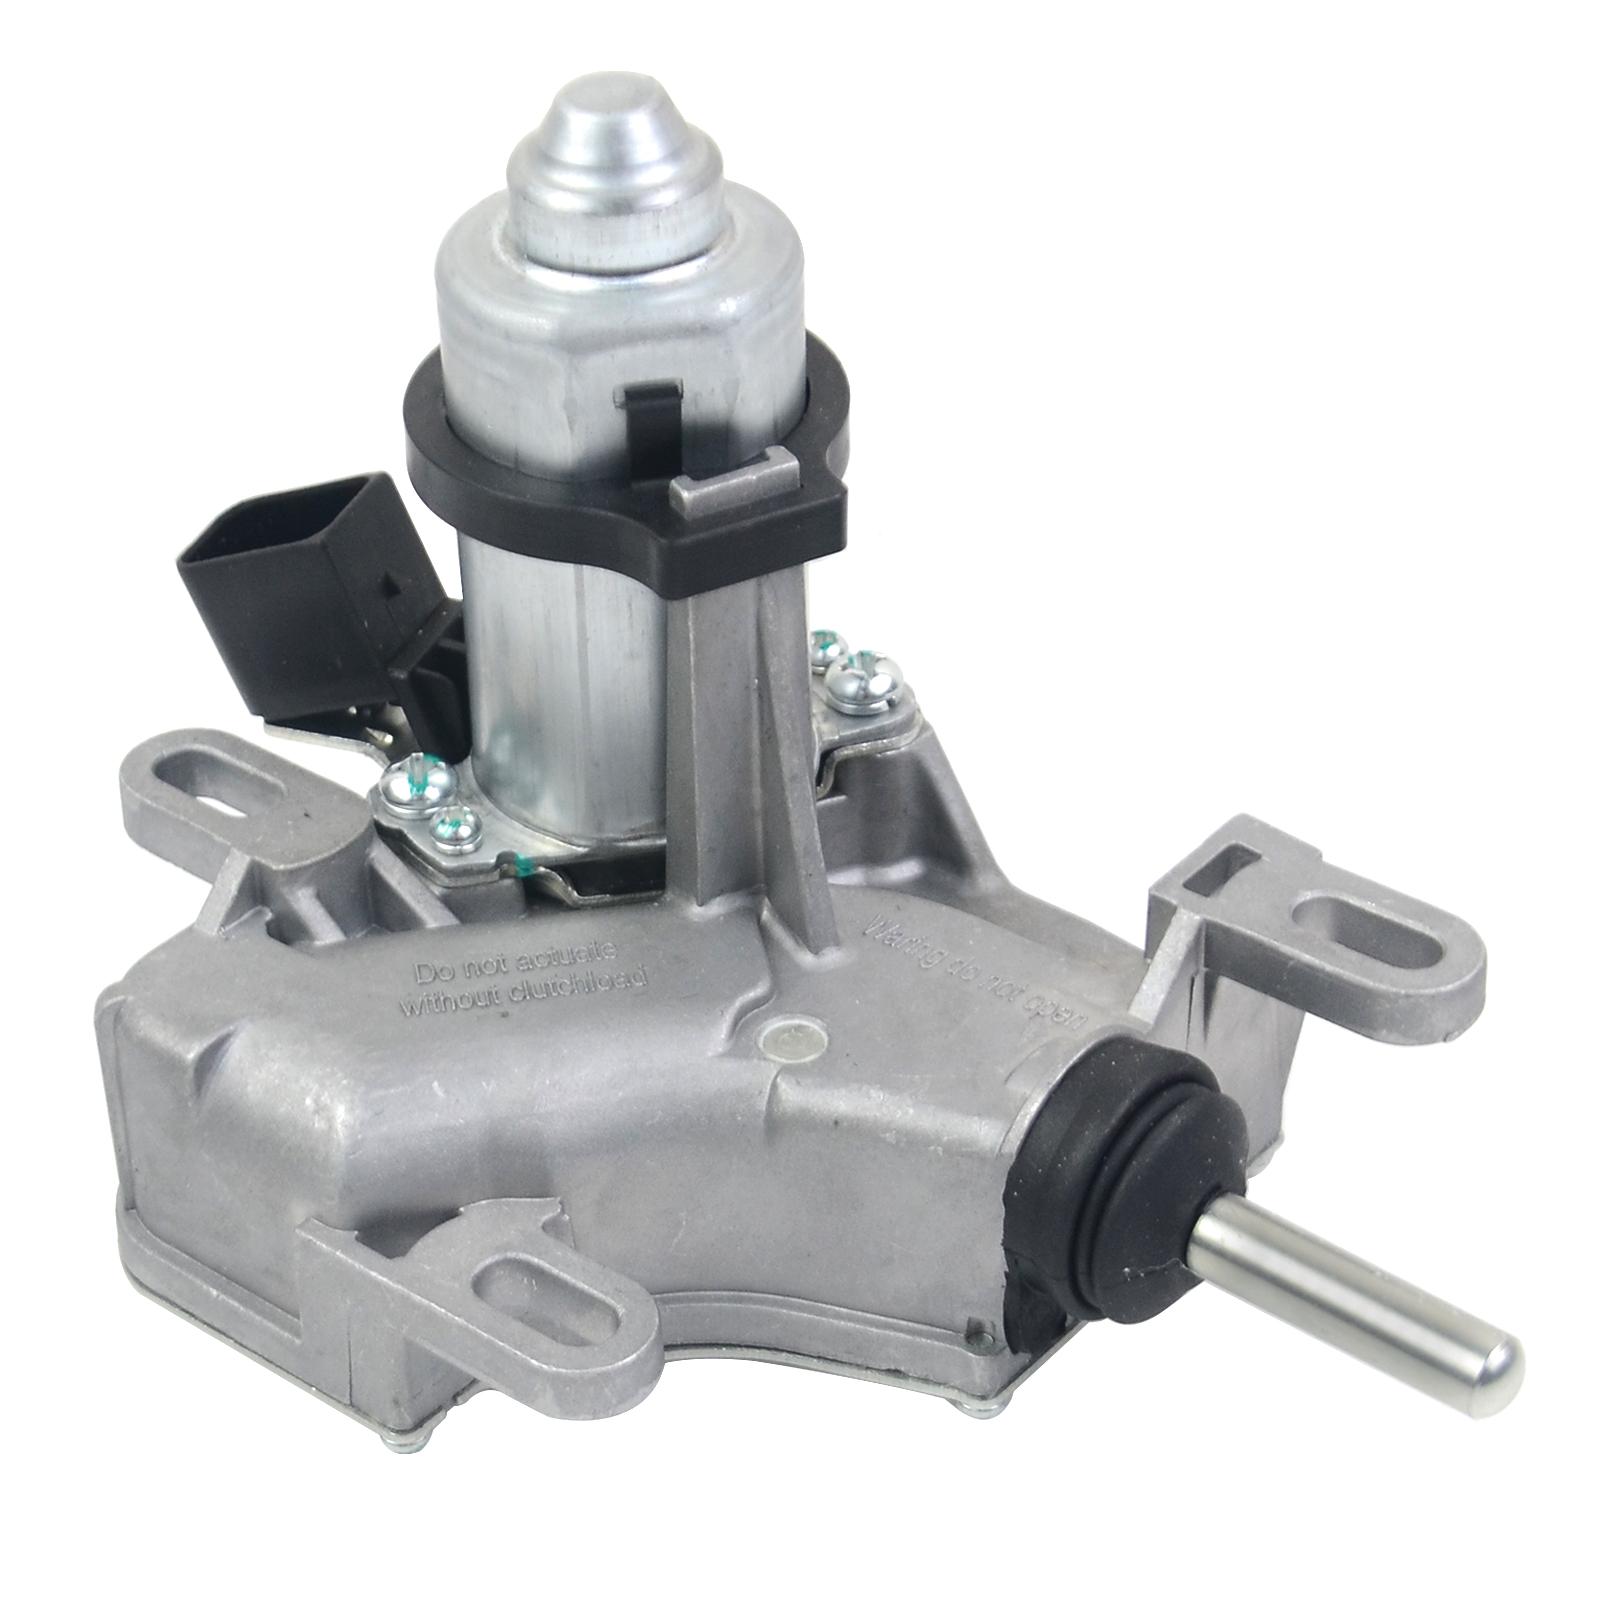 AP02 Clutch Slave Cylinder Actuator A4310021600 A 398 100 00 70 for Smart Cabrio City-Coupe Fortwo Roadster 1998-2007